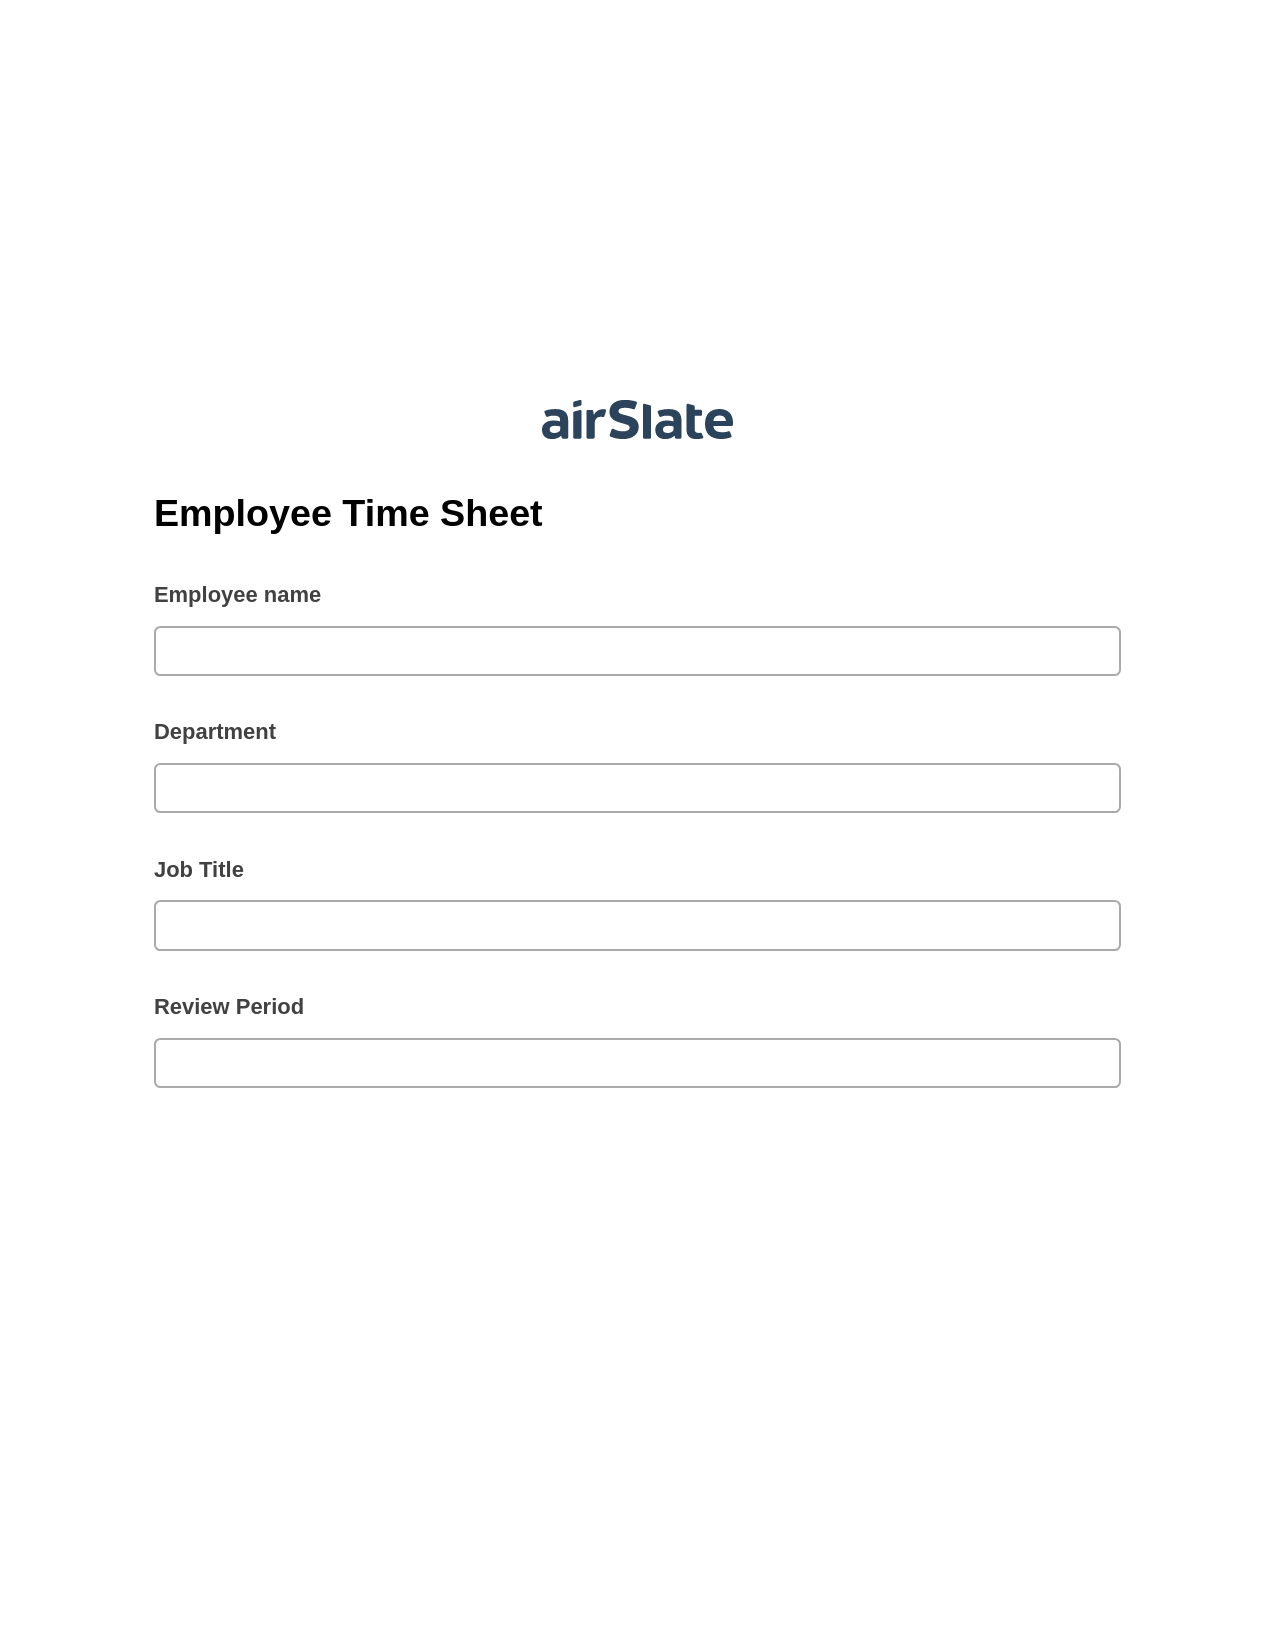 Multirole Employee Time Sheet Pre-fill from another Slate Bot, Create slate addon, Export to Google Sheet Bot